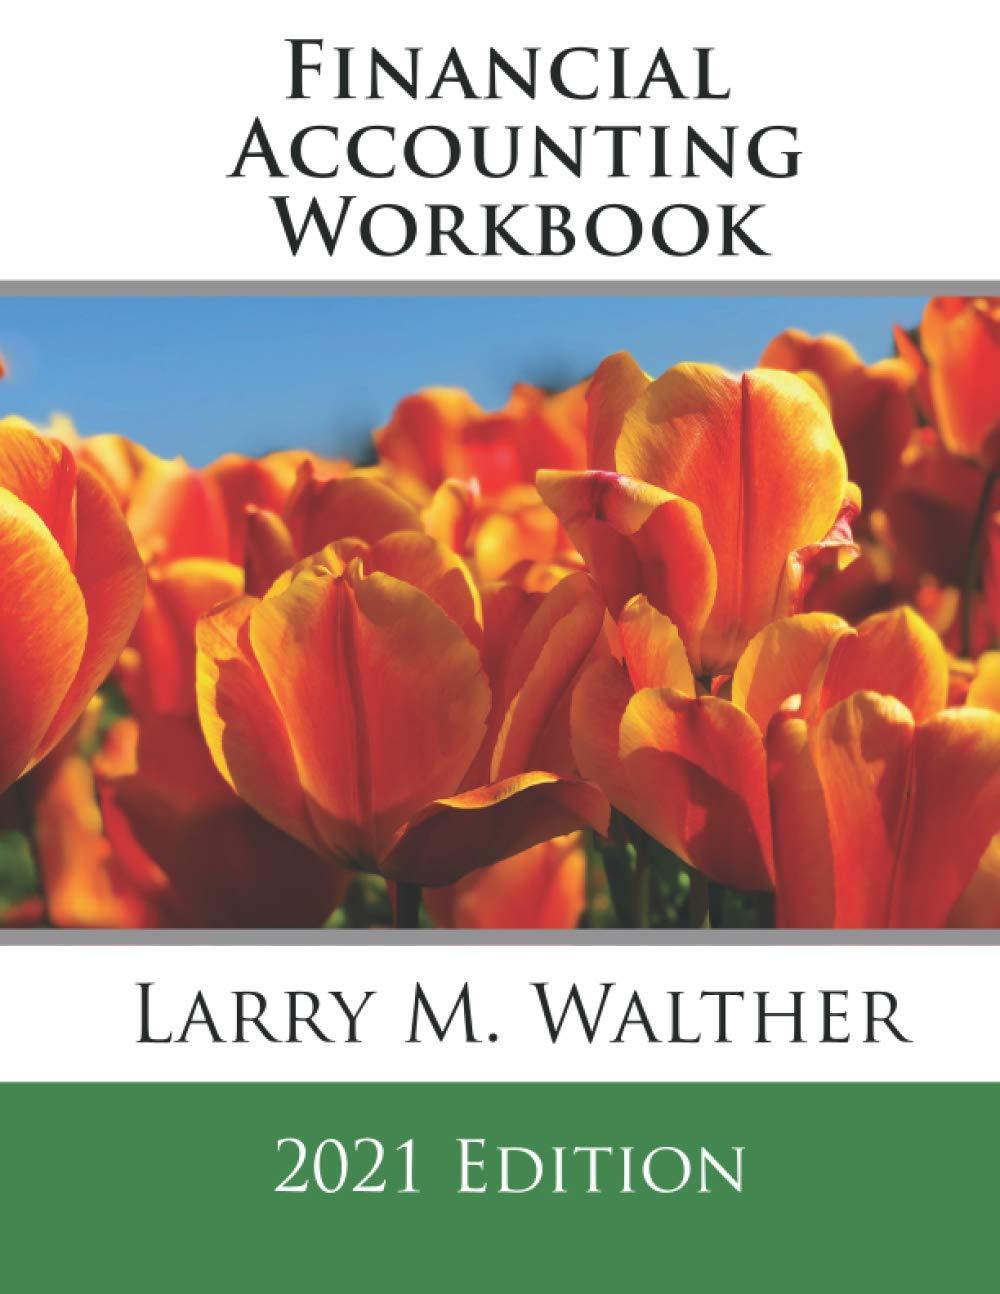 financial accounting workbook 2021th edition larry m. walther 8550522790, 979-8550522790